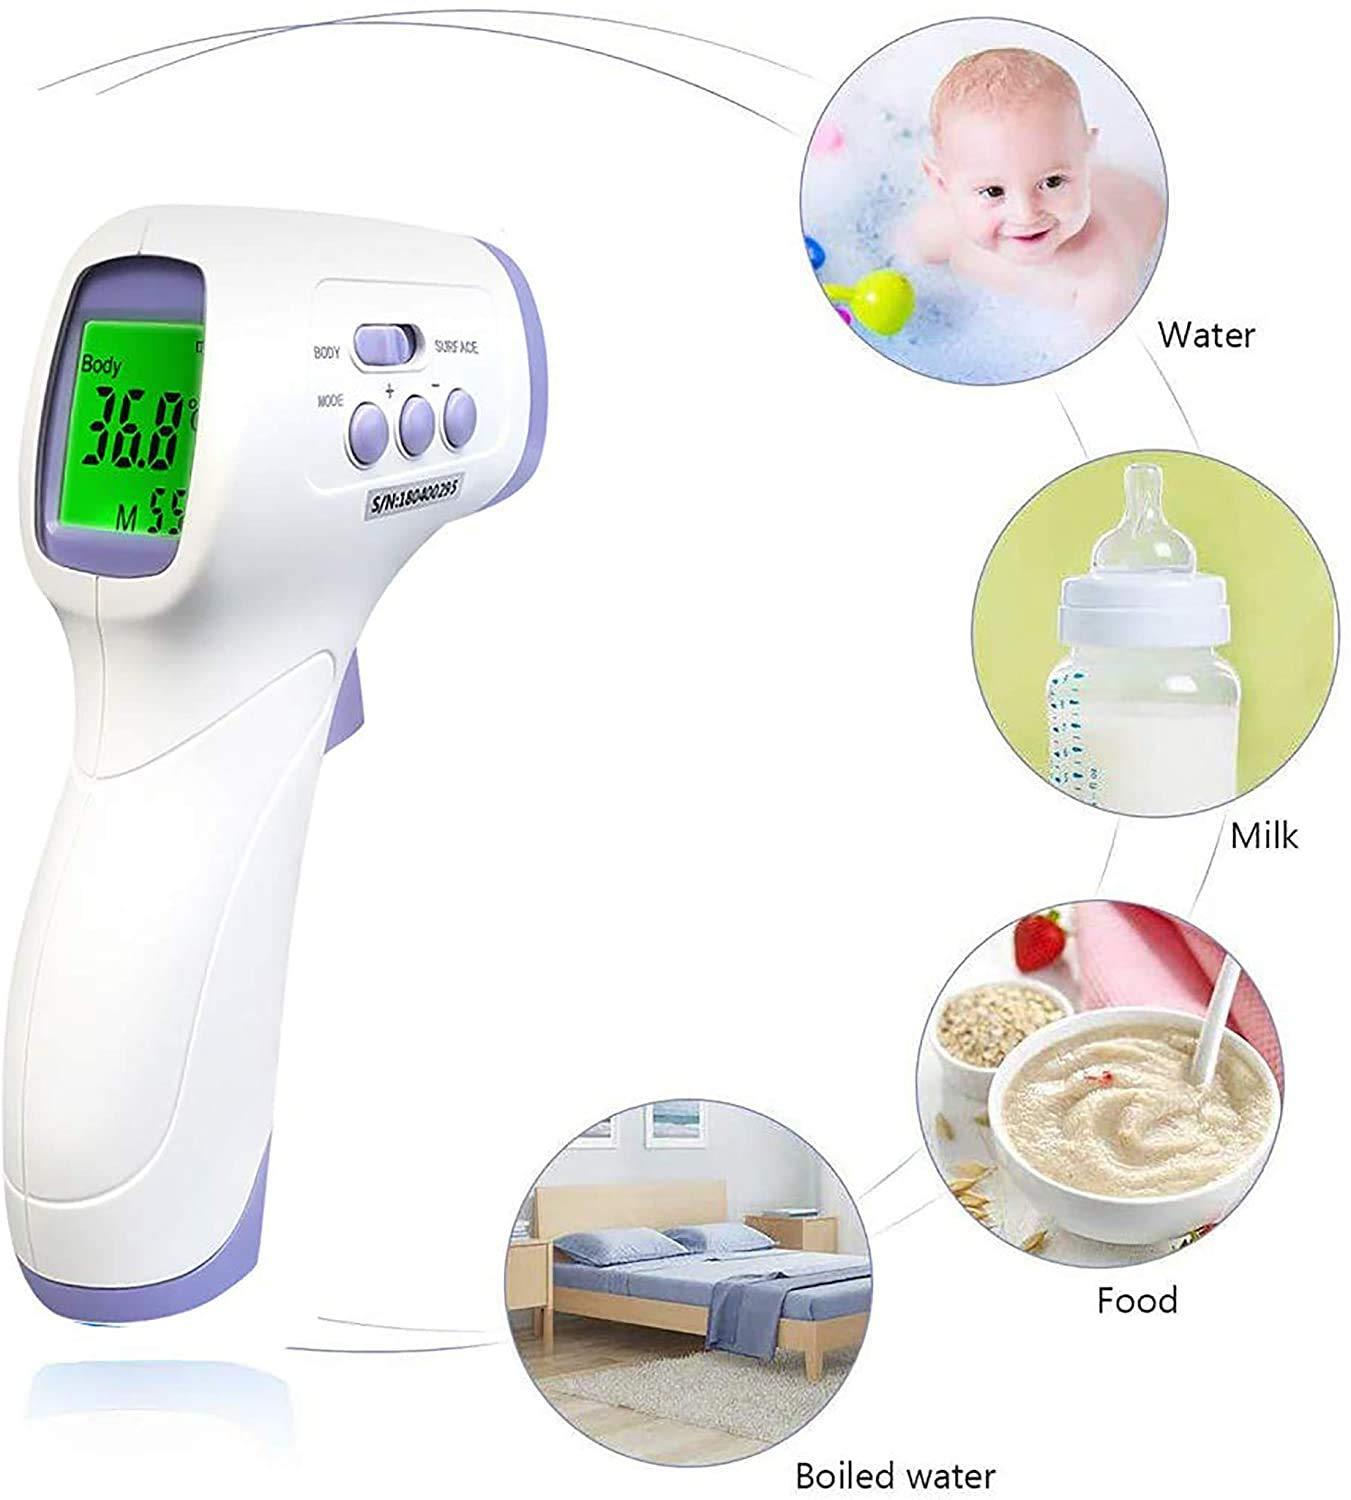 Infrared Thermometer Gun Non-Touch Digital LCD Temperature Fever For Adults  Kids